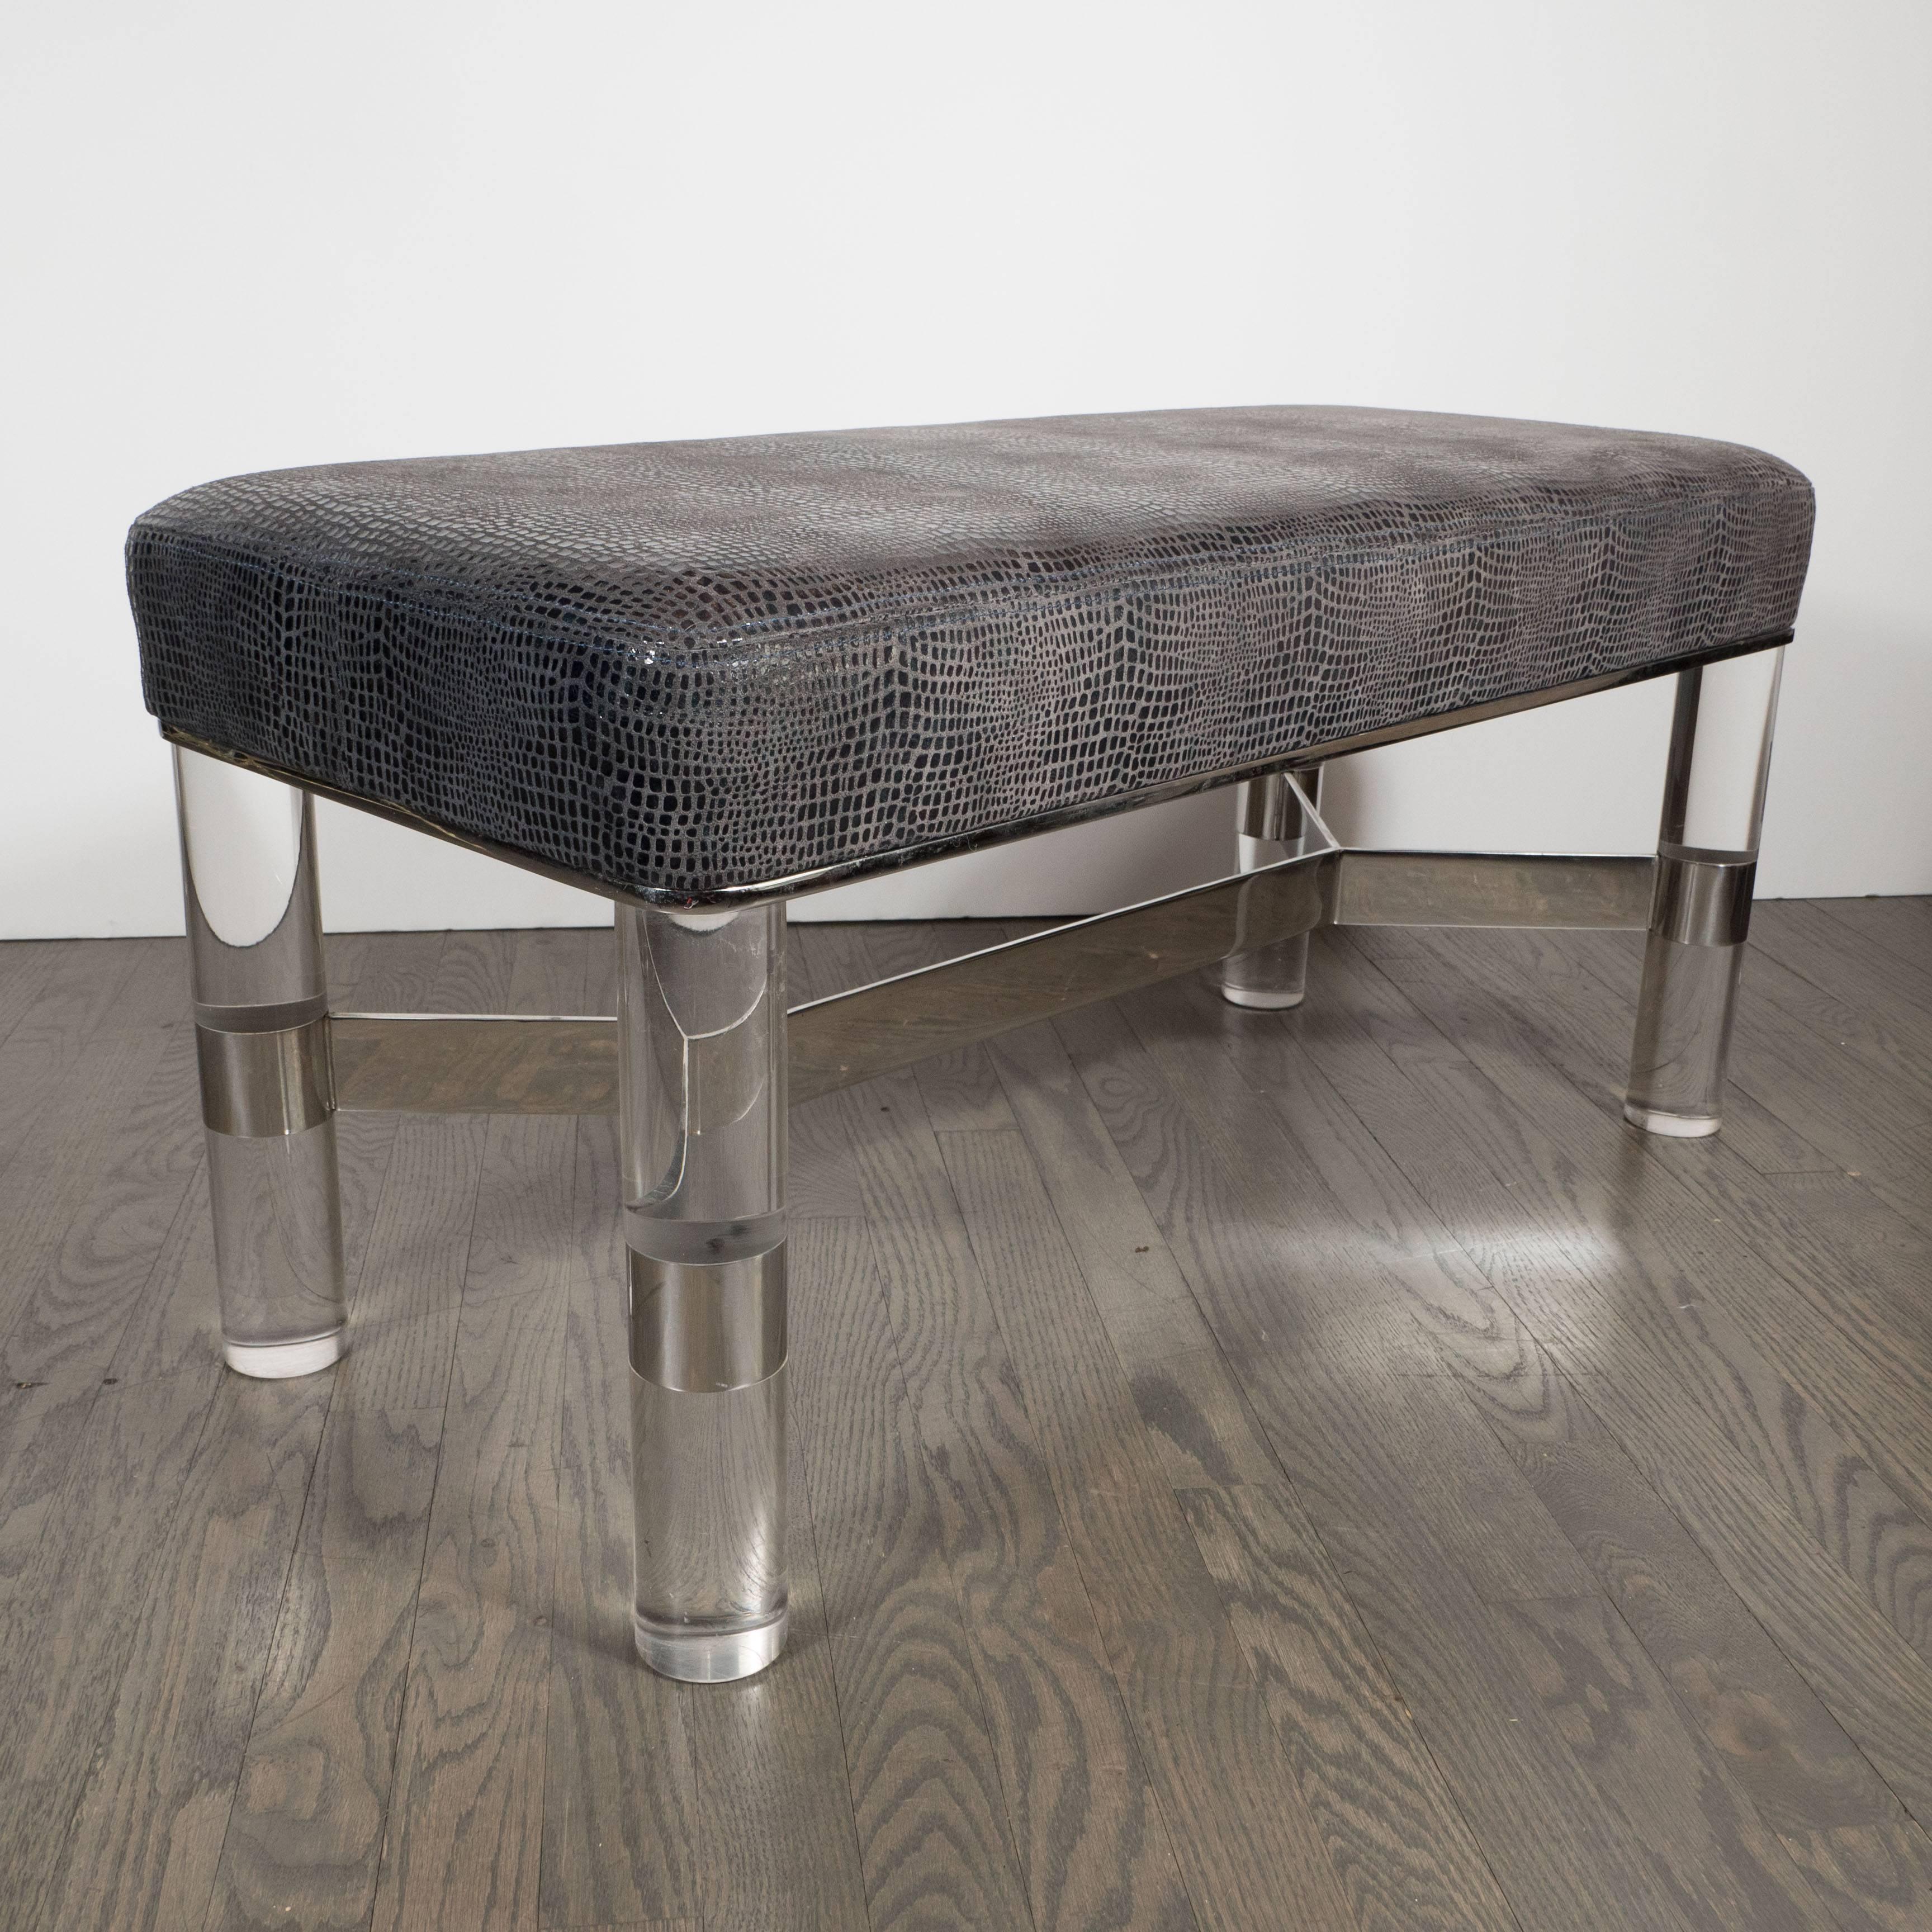 A luxe Mid-Century Modernist Lucite and chrome bench by Karl Springer. 
The seating area with ultra chic crocodile pattern fabric upholstery, the seat cushion is thick and comfortable. The four cylindrical Lucite legs with chrome detailing and